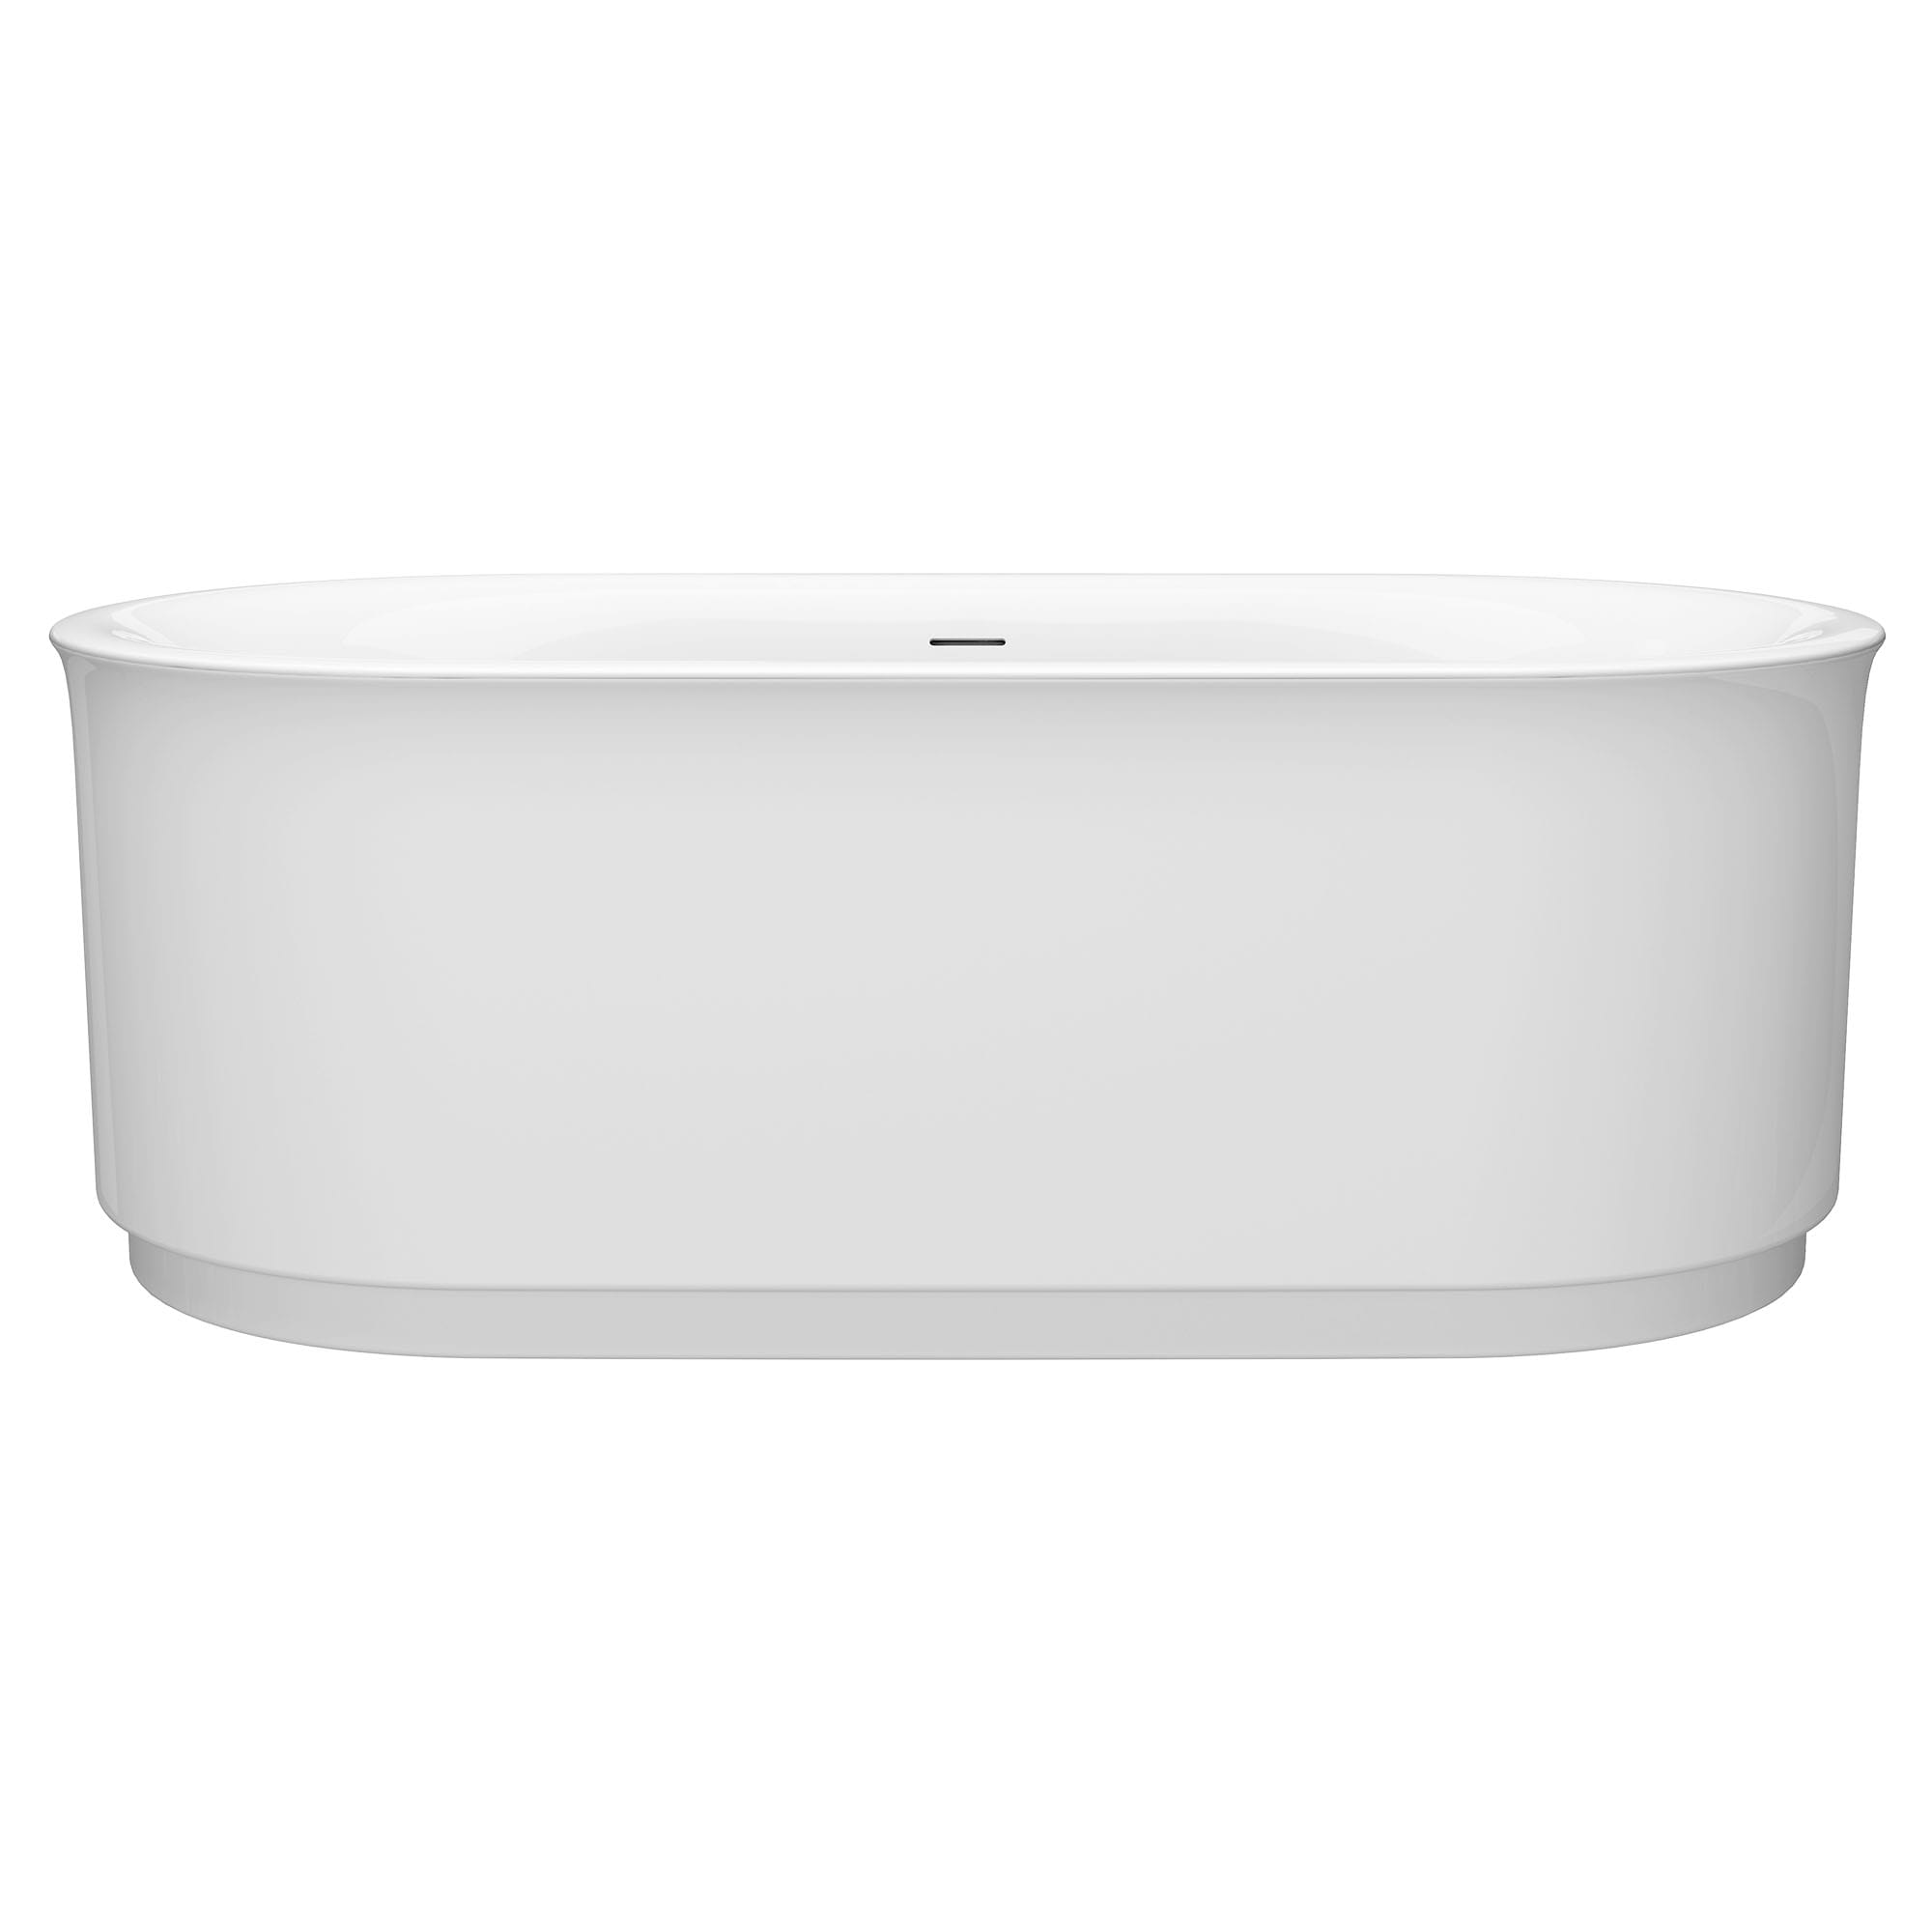 Studio S 68 x 34 Inch Freestanding Bathtub Center Drain With Integrated Overflow WHITE